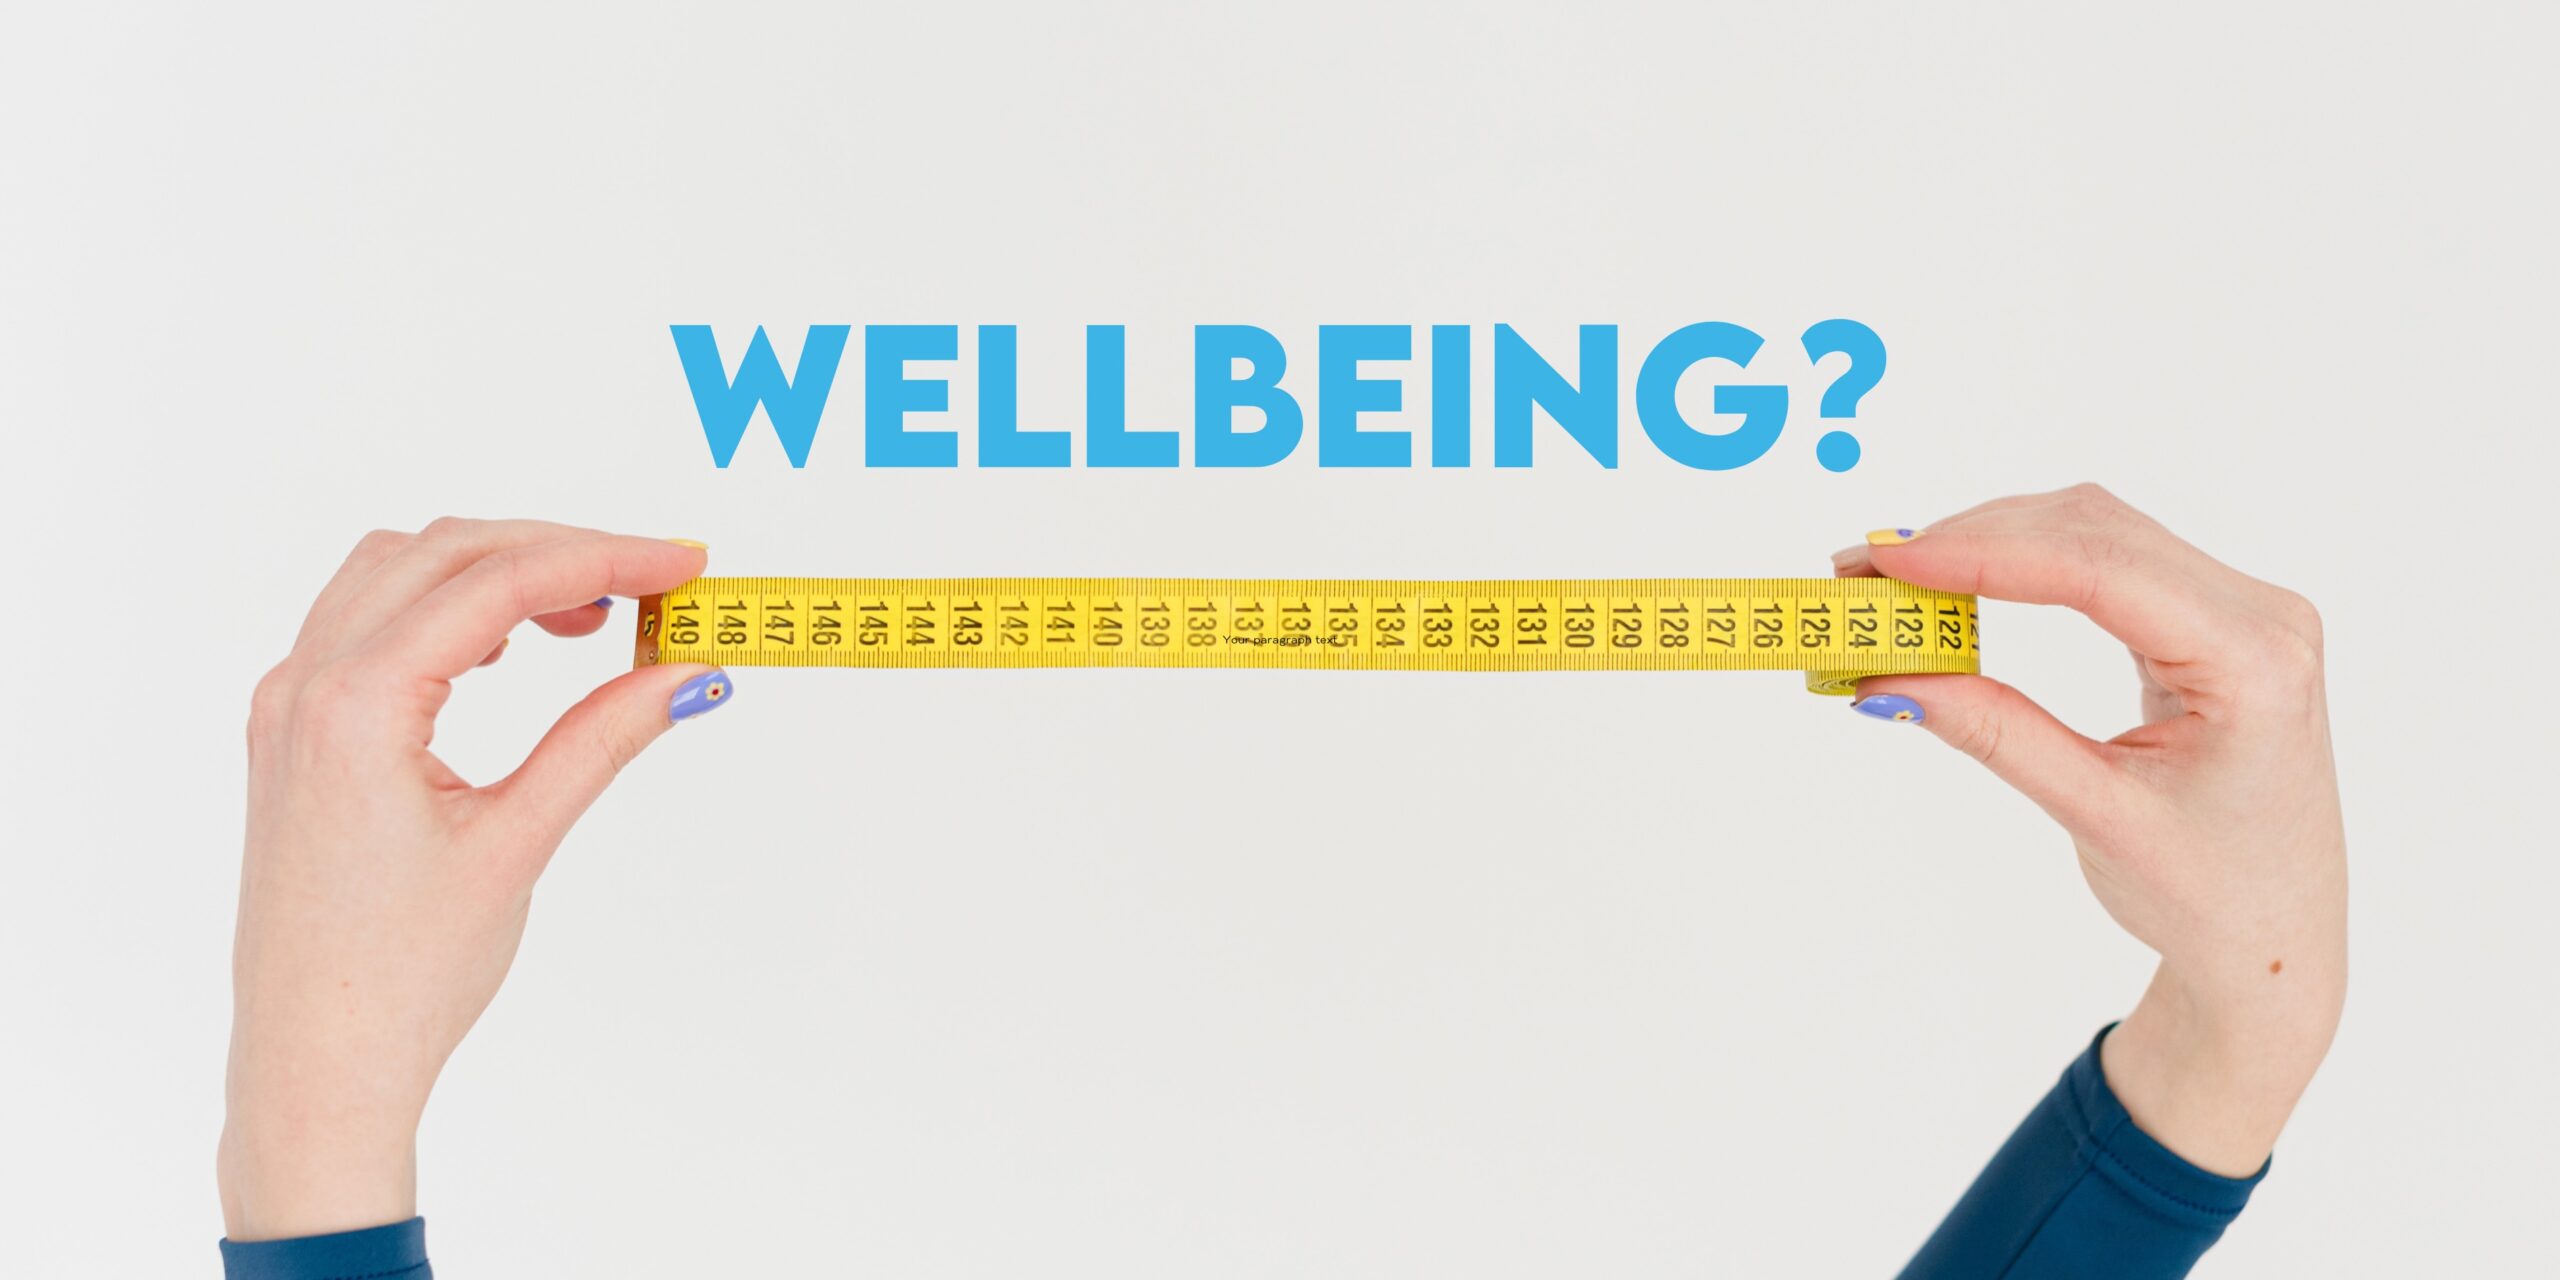 Two hands holding a stretched out yellow tape measure with the text 'wellbeing?' written above